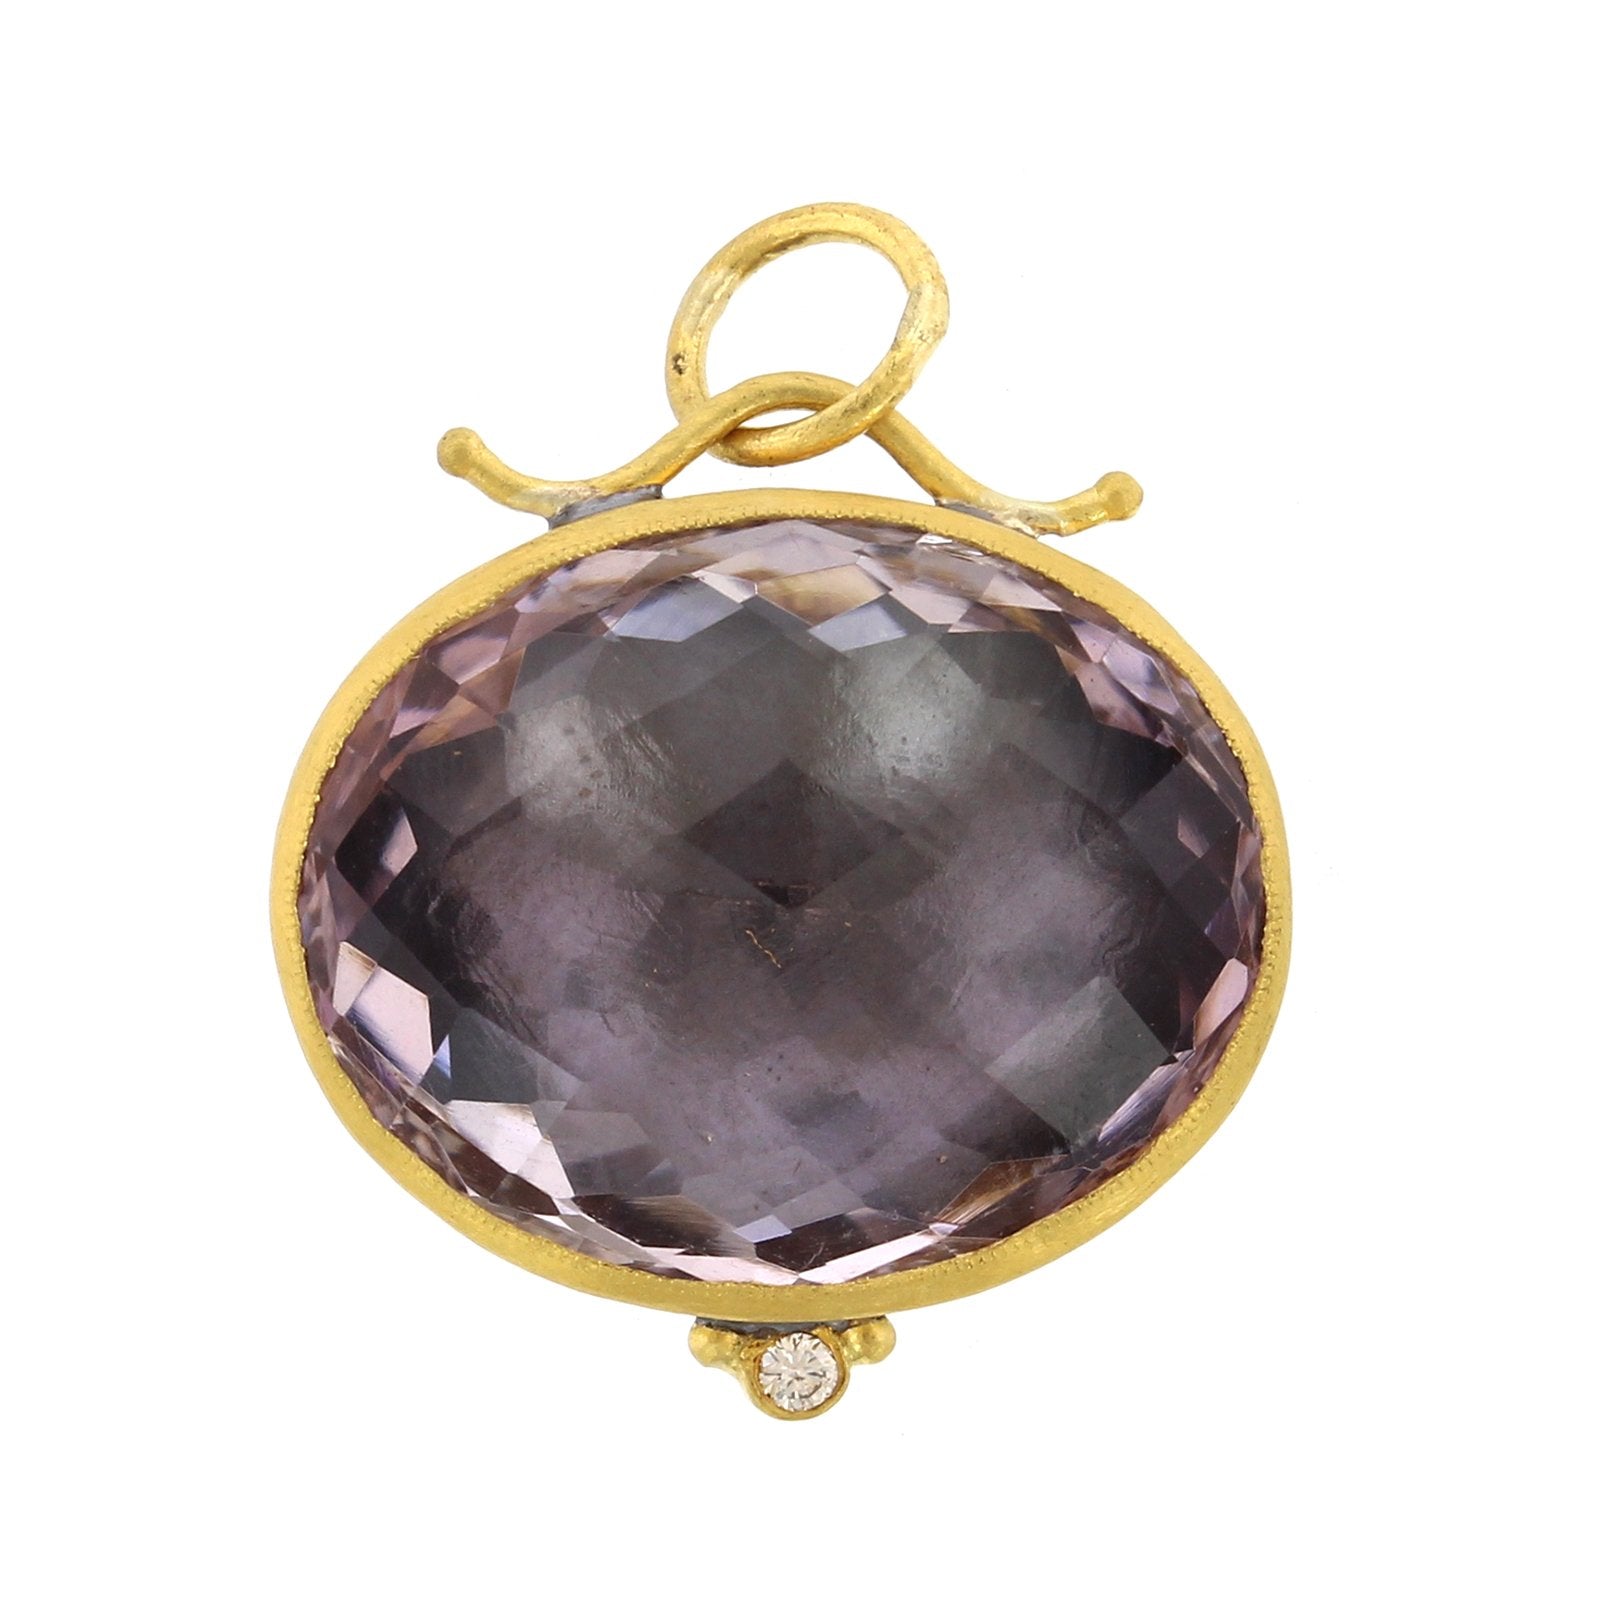 24K Yellow Gold and Sterling Silver Amethyst Charm